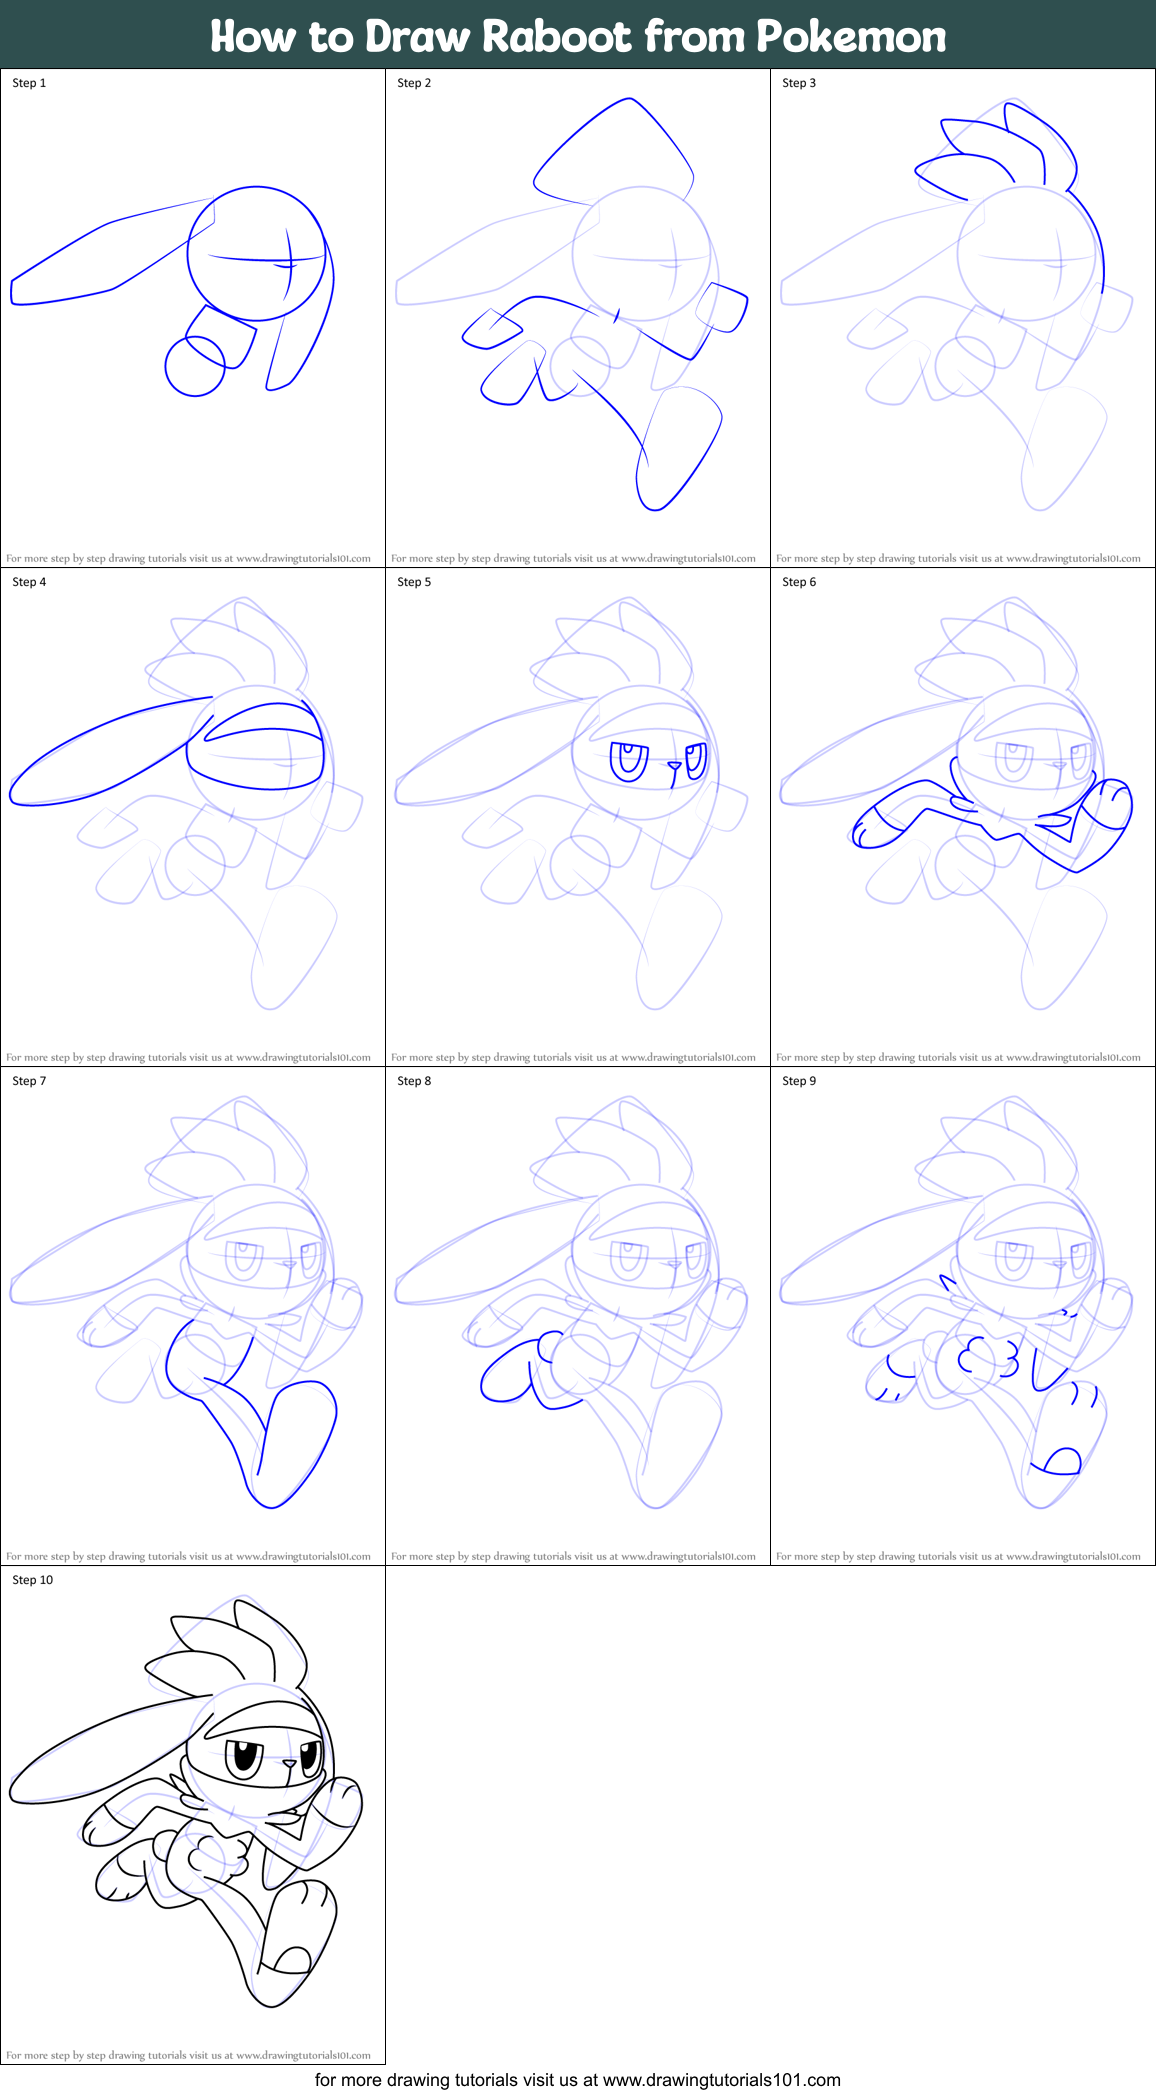 How to Draw Raboot from Pokemon printable step by step drawing sheet